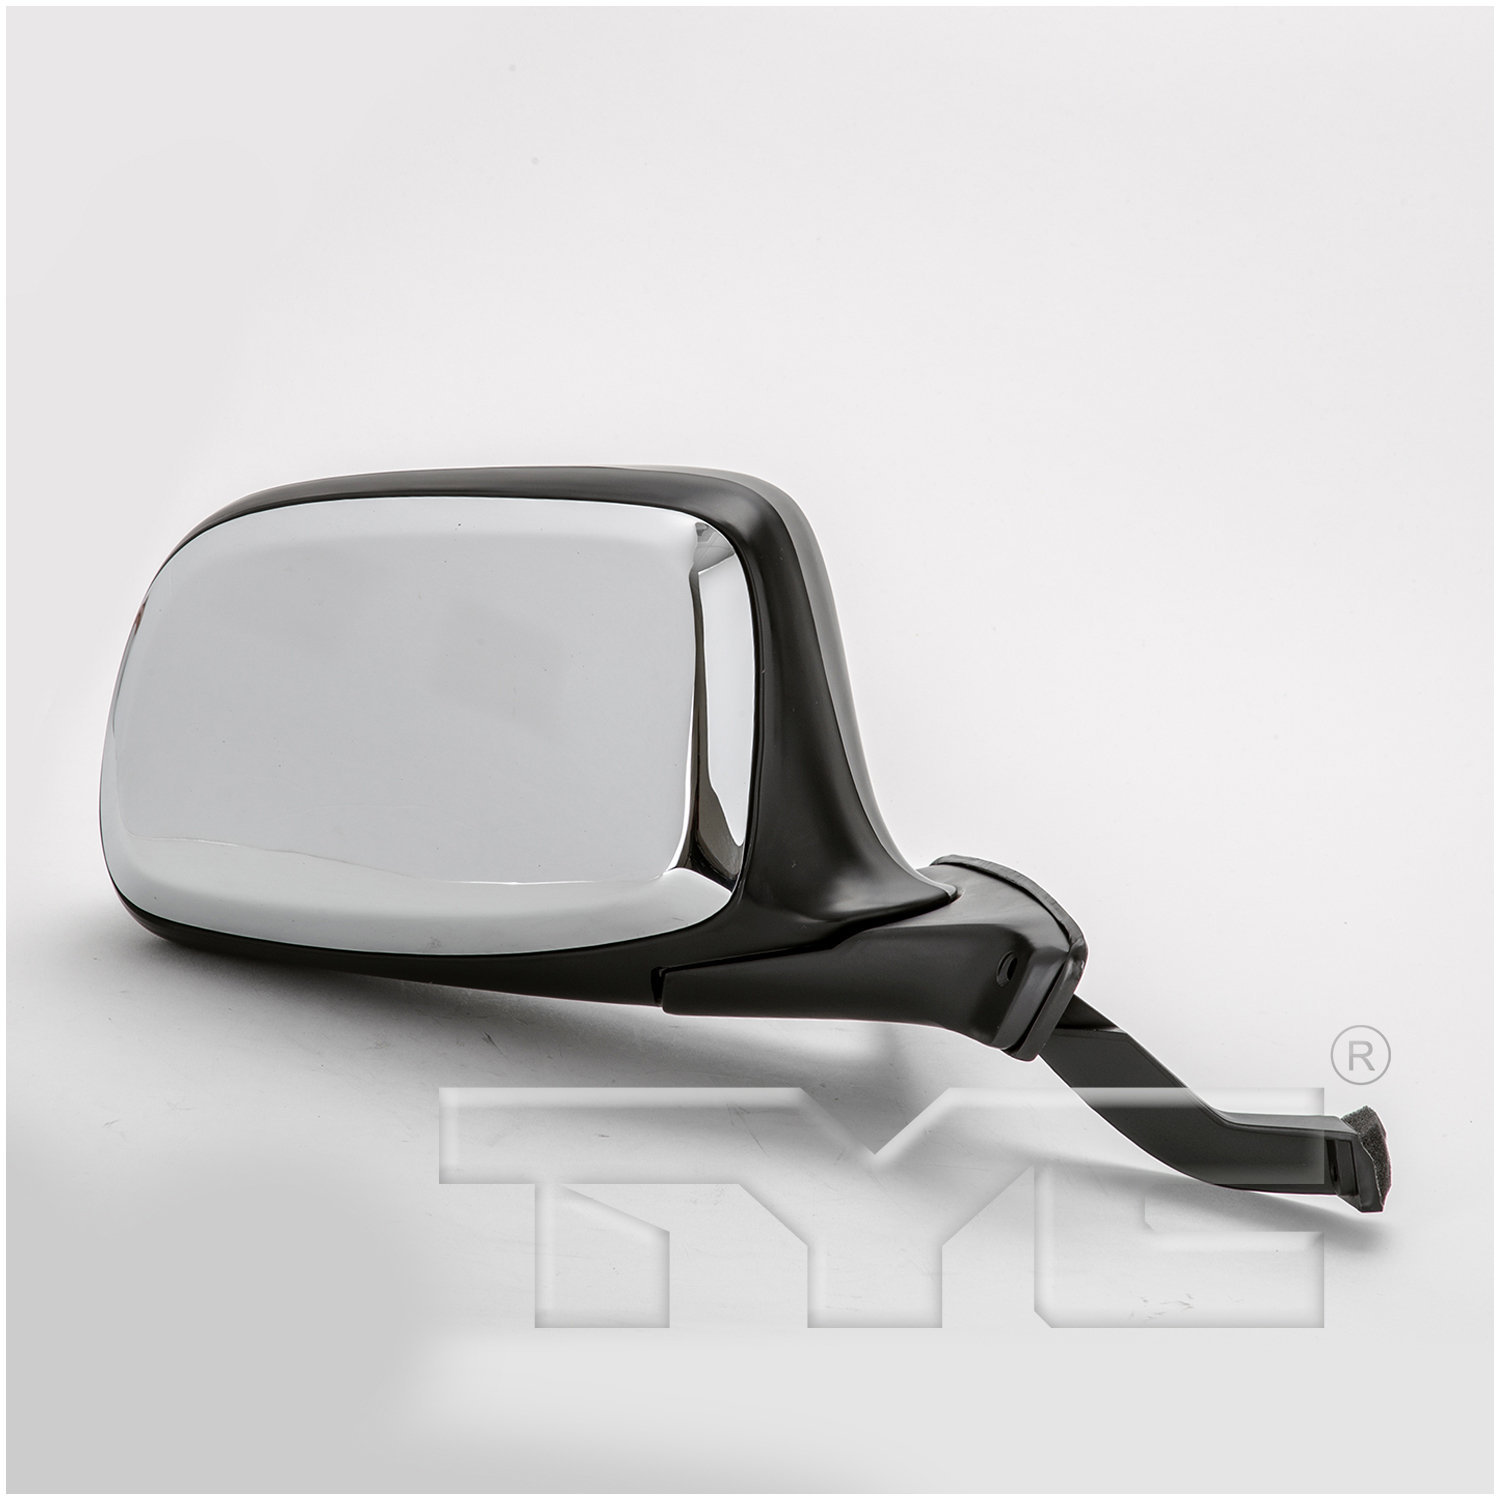 Replacement FORD F150 MIRRORS Aftermarket MIRRORS for FORD F150